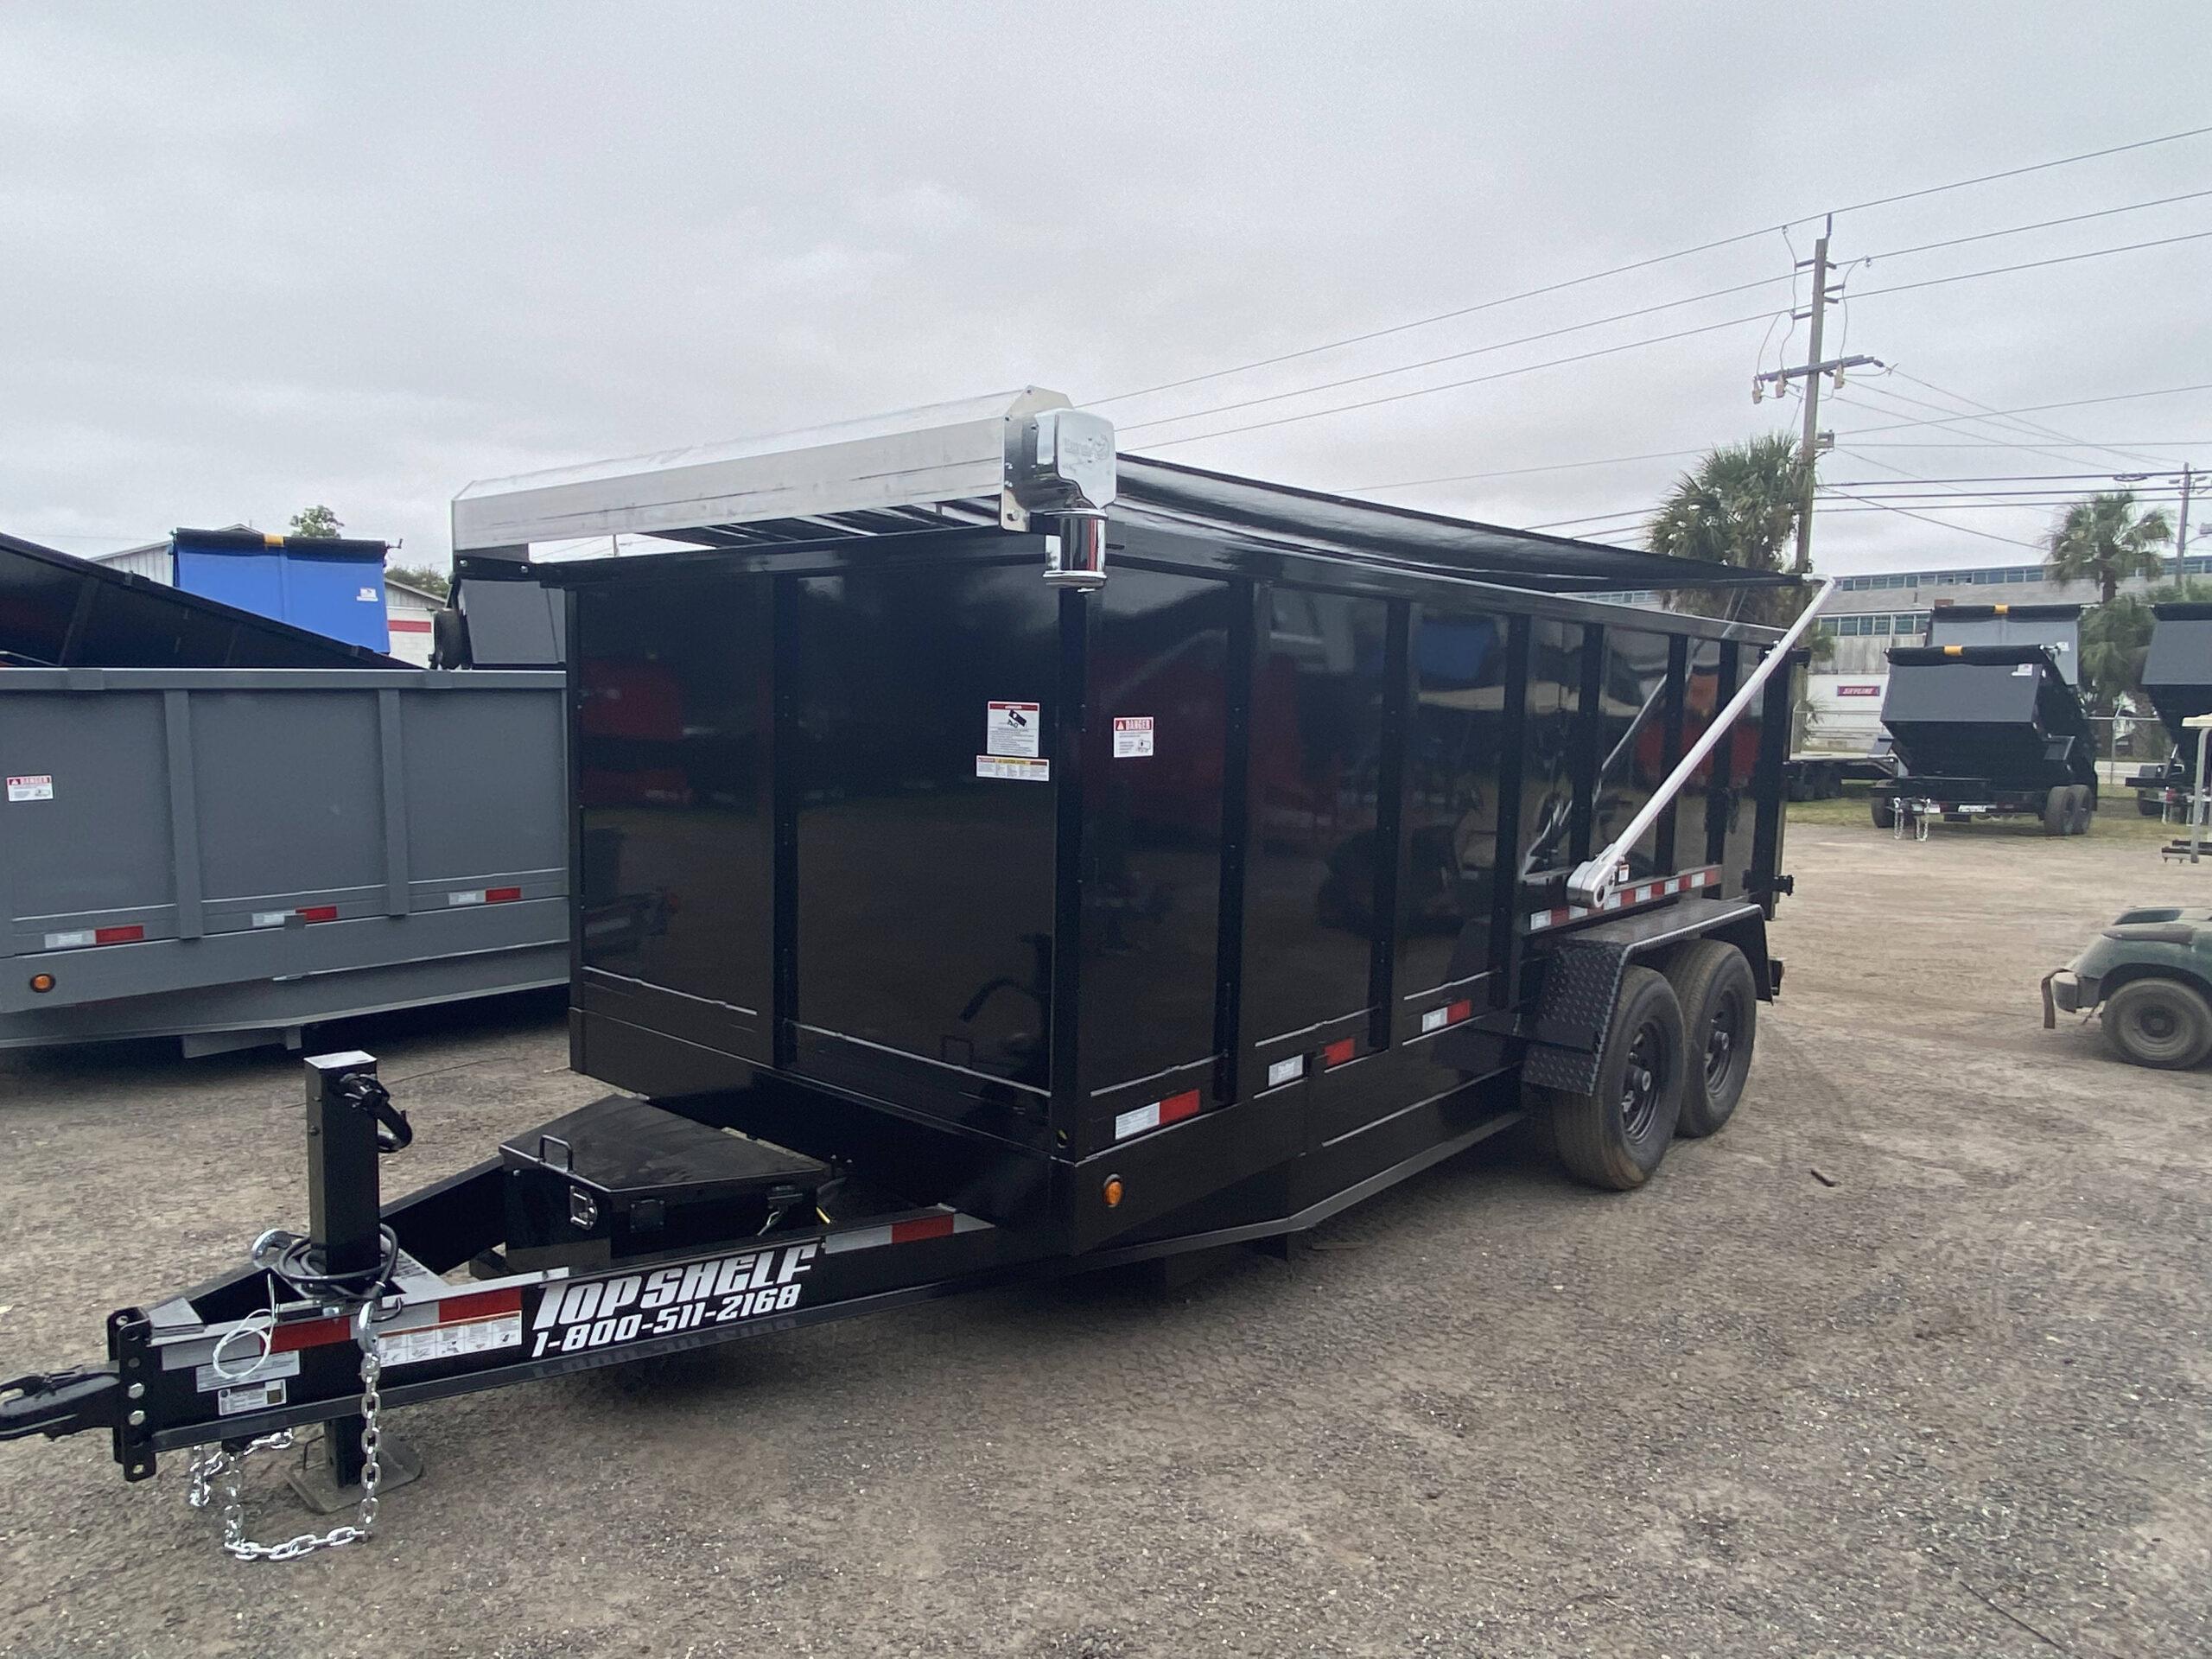 7 Essential Steps: How to Buy a Dump Trailer for Your Needs The Best Dump Trailers Buying Guides